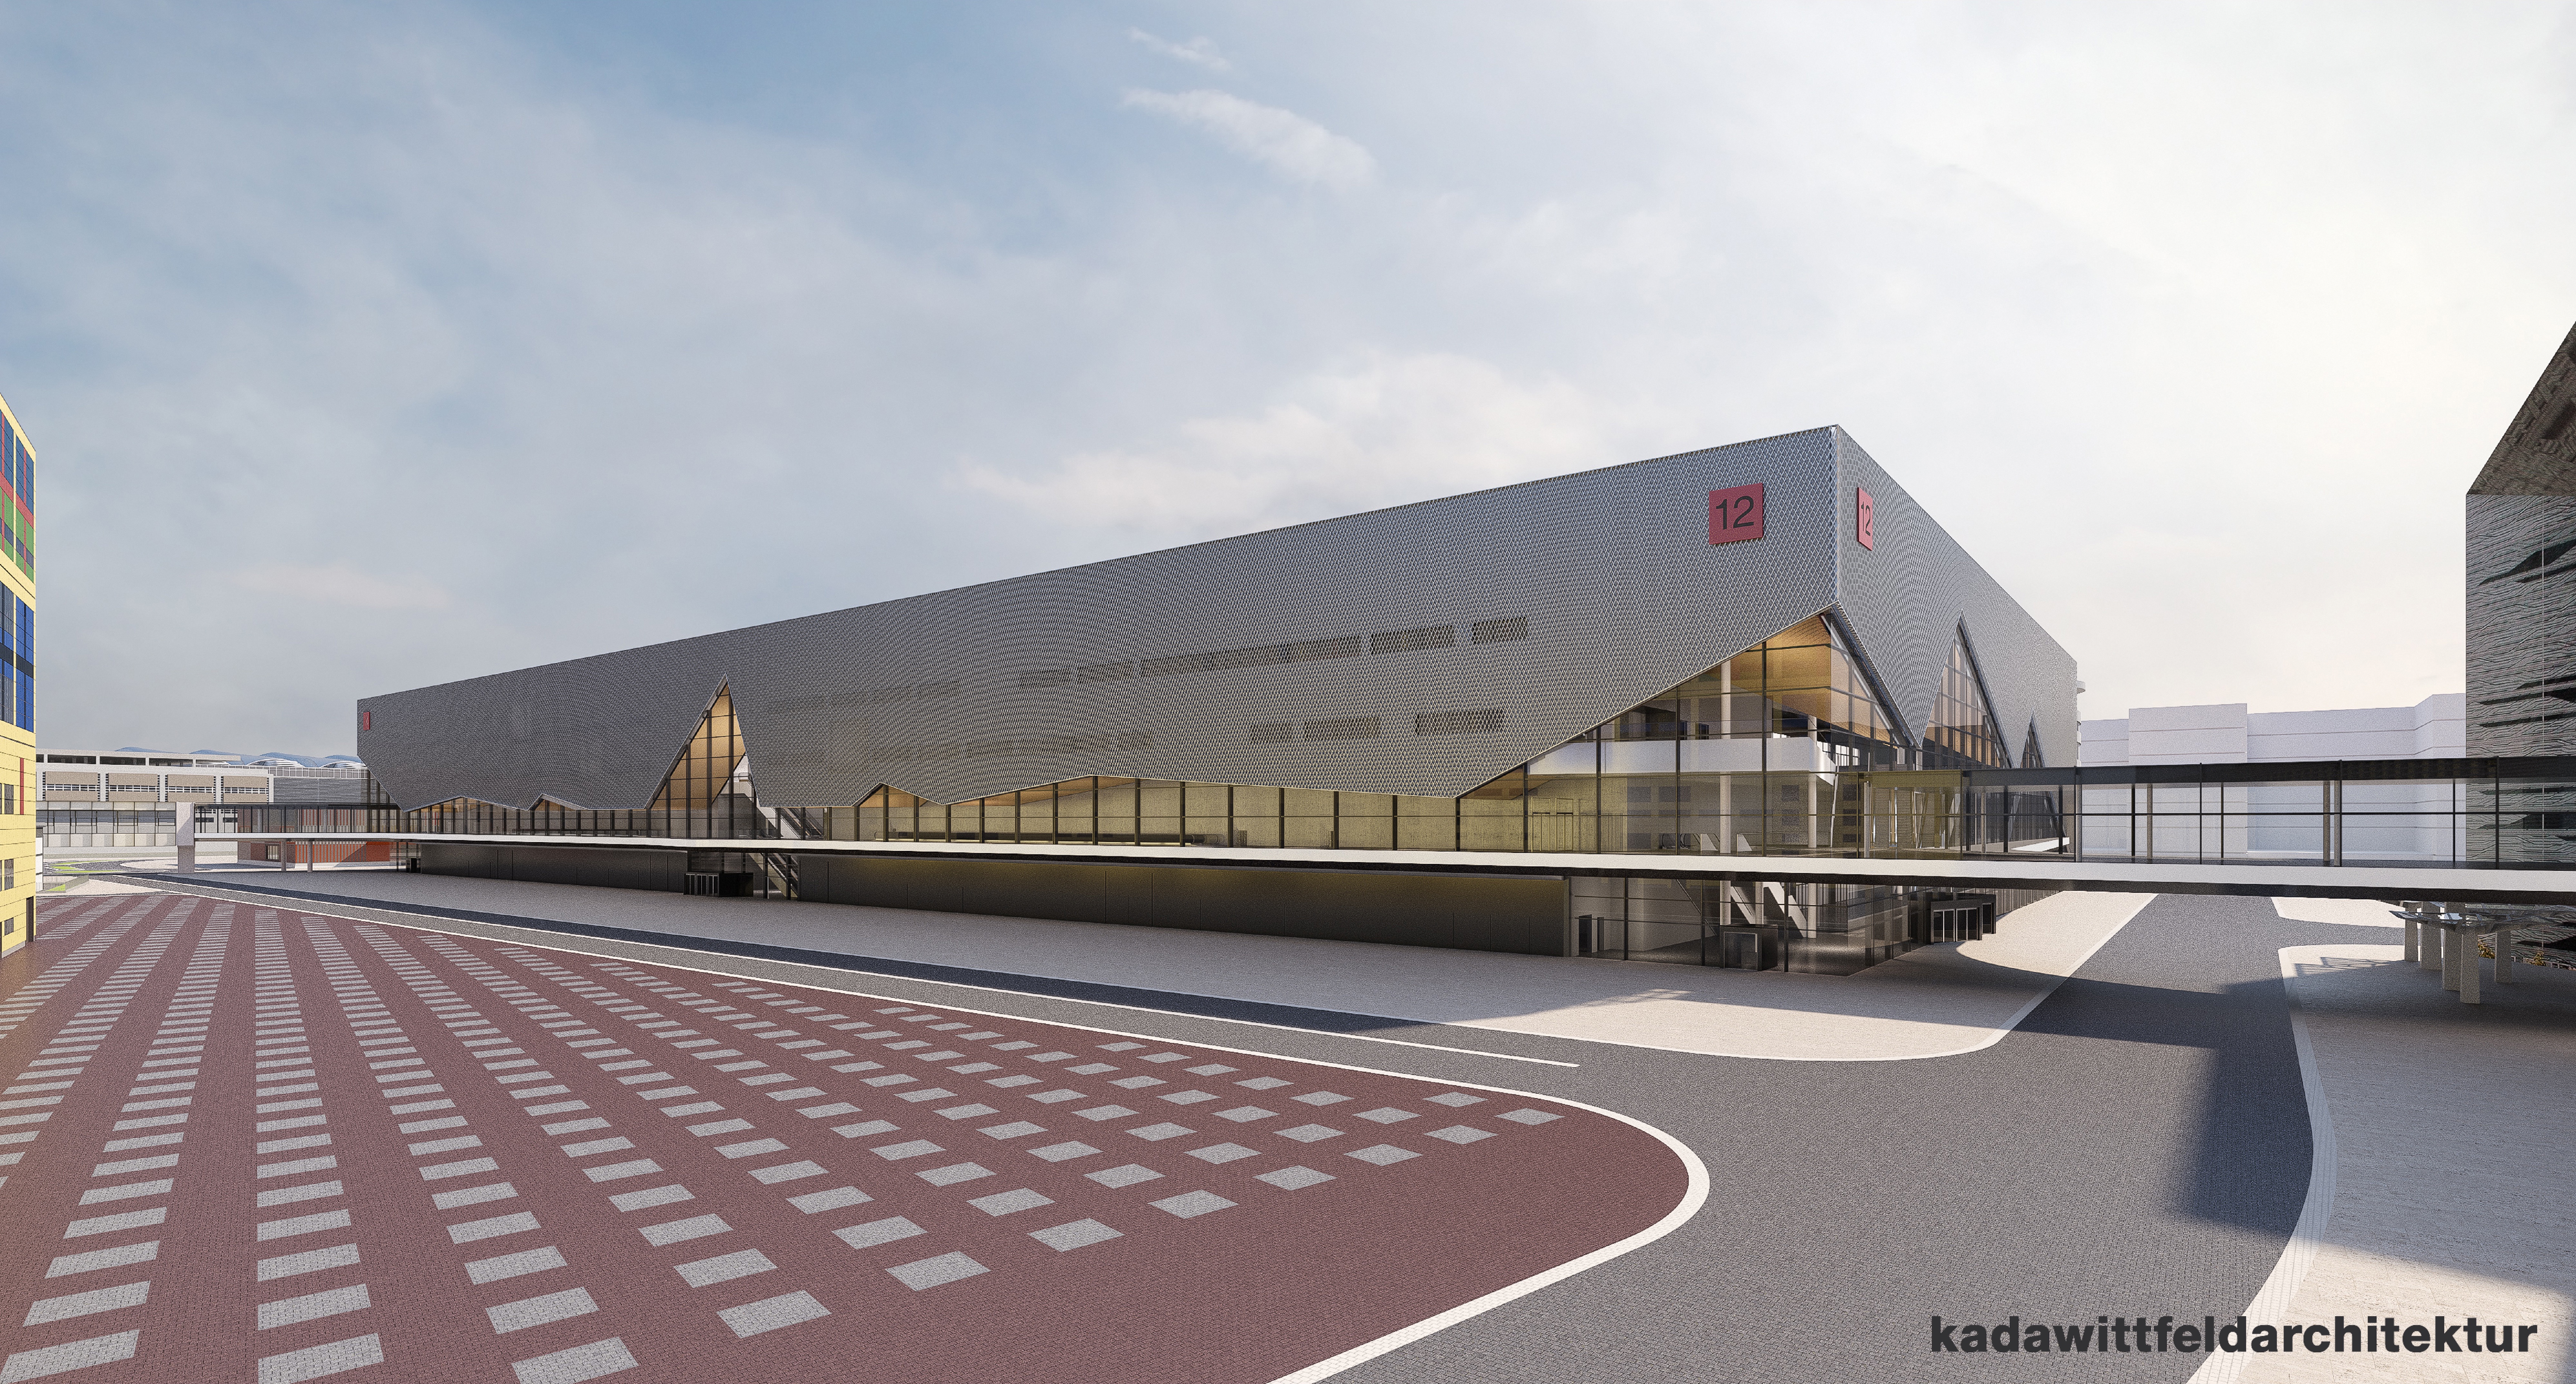 The new Exhibition Hall 12 will be used for IFFA 2019 for the first time (Source: Messe Frankfurt)